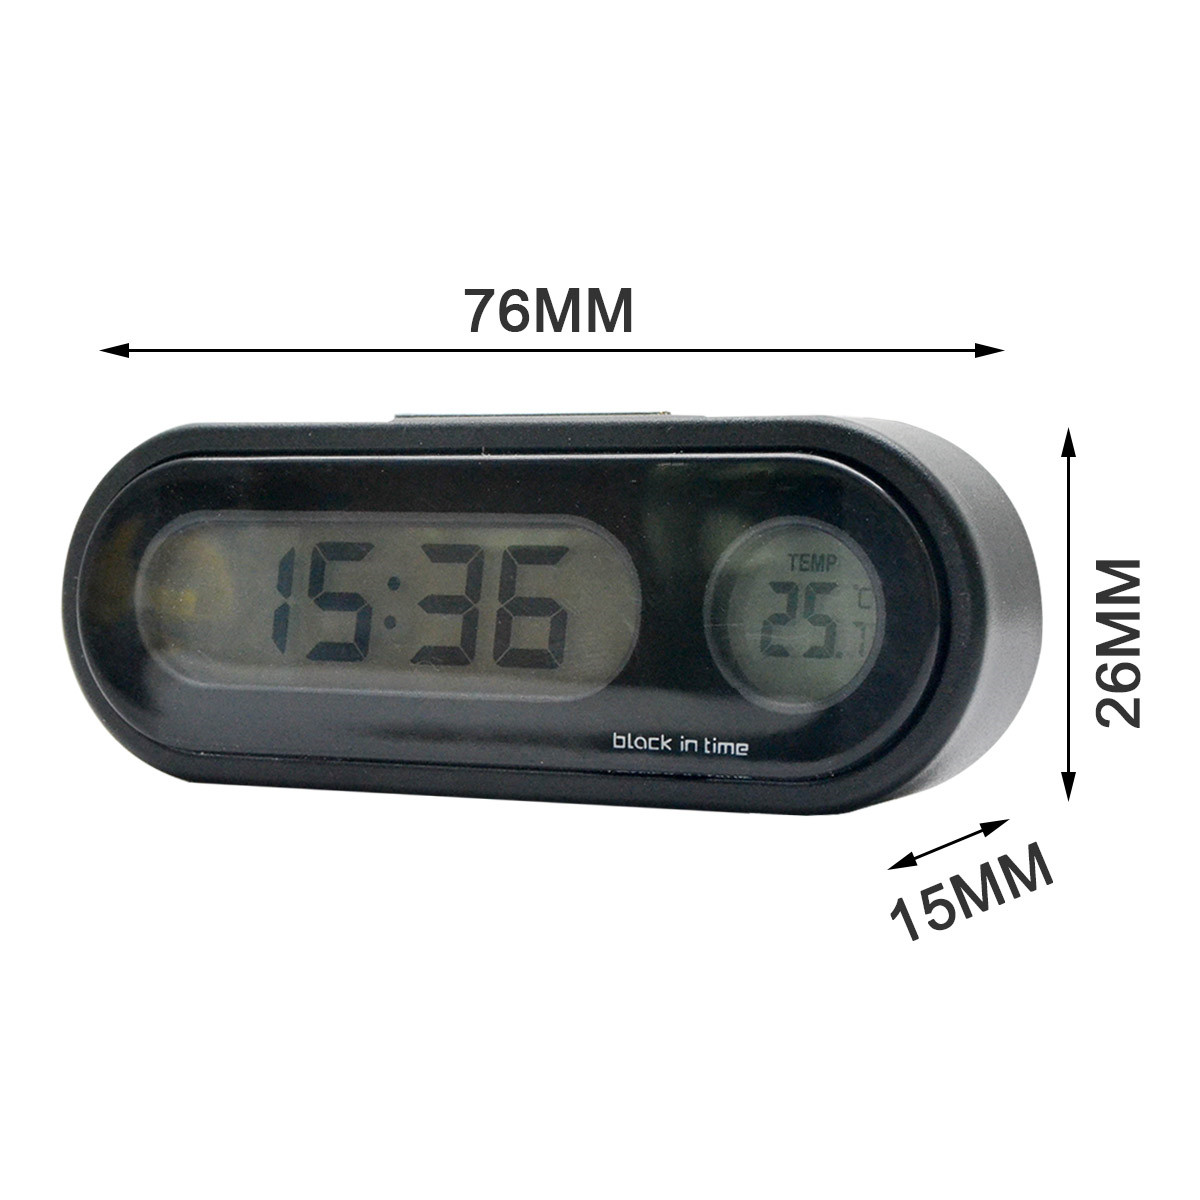 MACHSWON Car Clip-on Digital LCD Thermometer Backlight Clock for Bicycle Motorcycle Auto Moto Truck